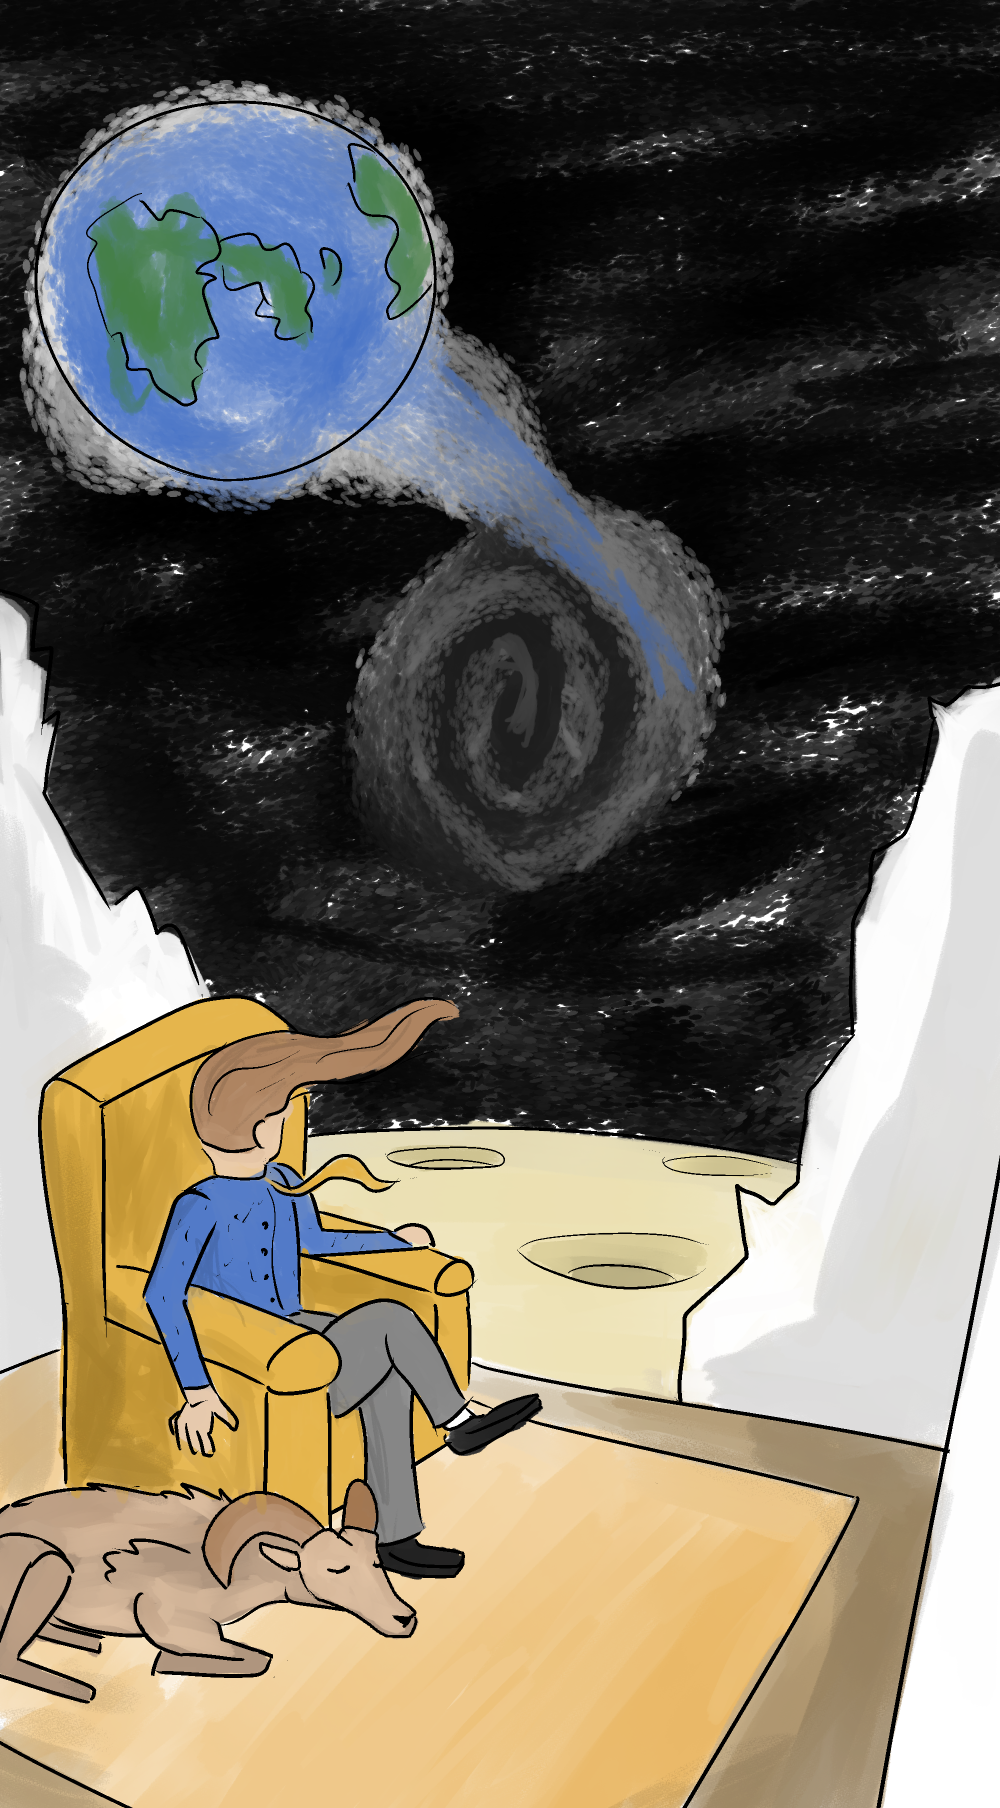 Man sitting in armchair on the moon as the Earth is consumed by a spiral.